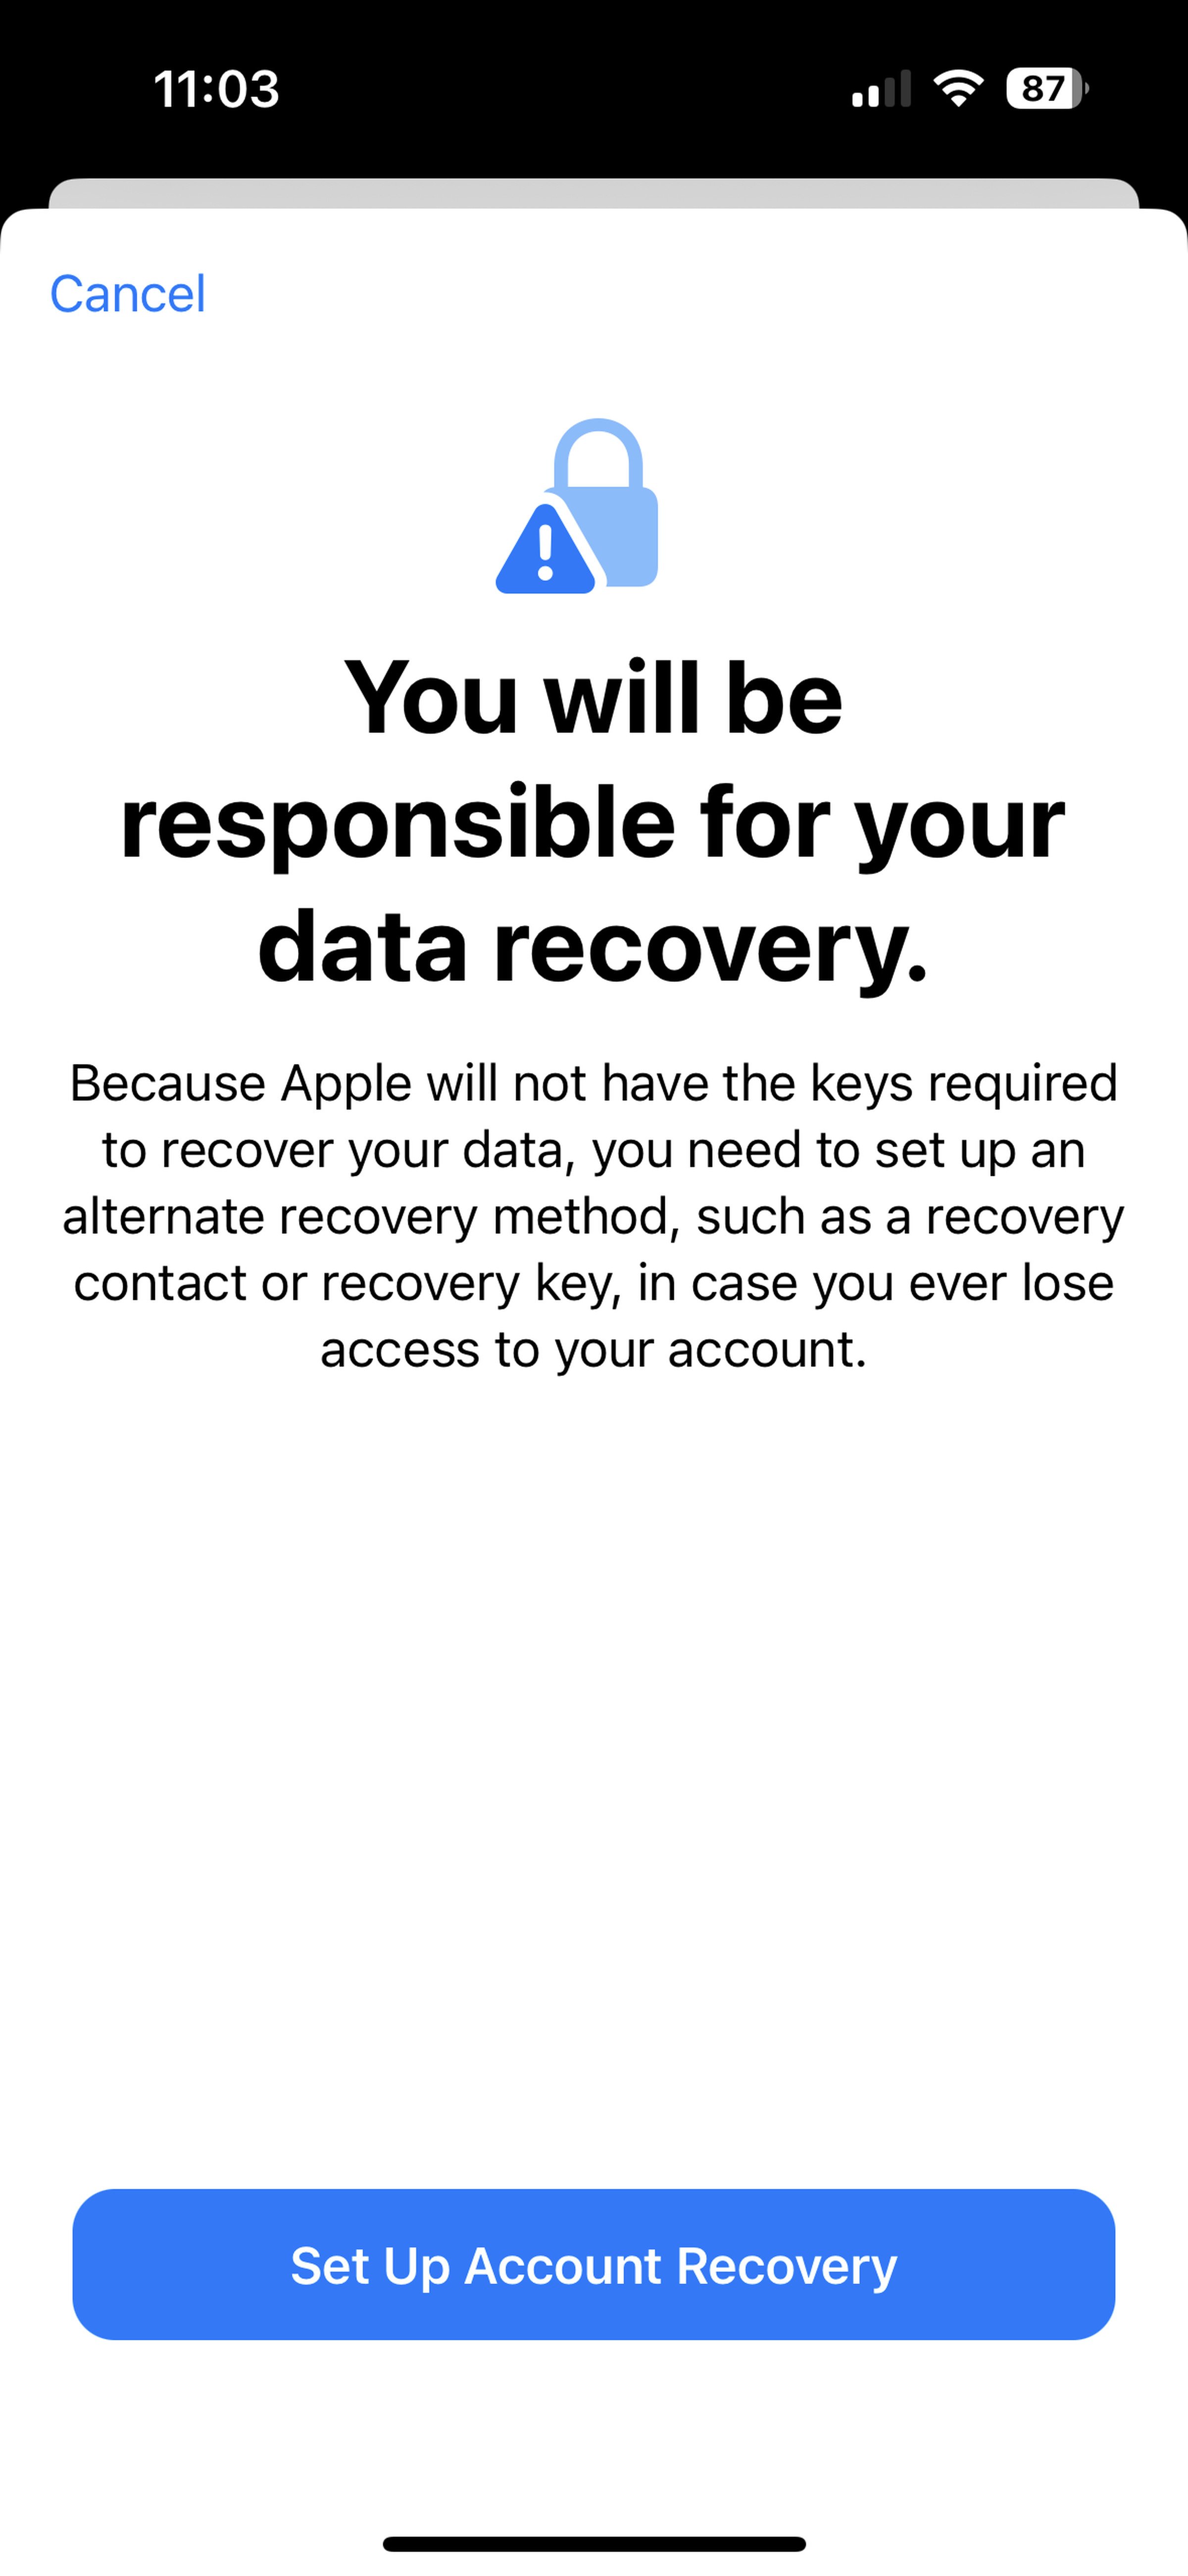 Screenshot with text indicating that the user needs to set up account recovery because Apple will no longer have access.